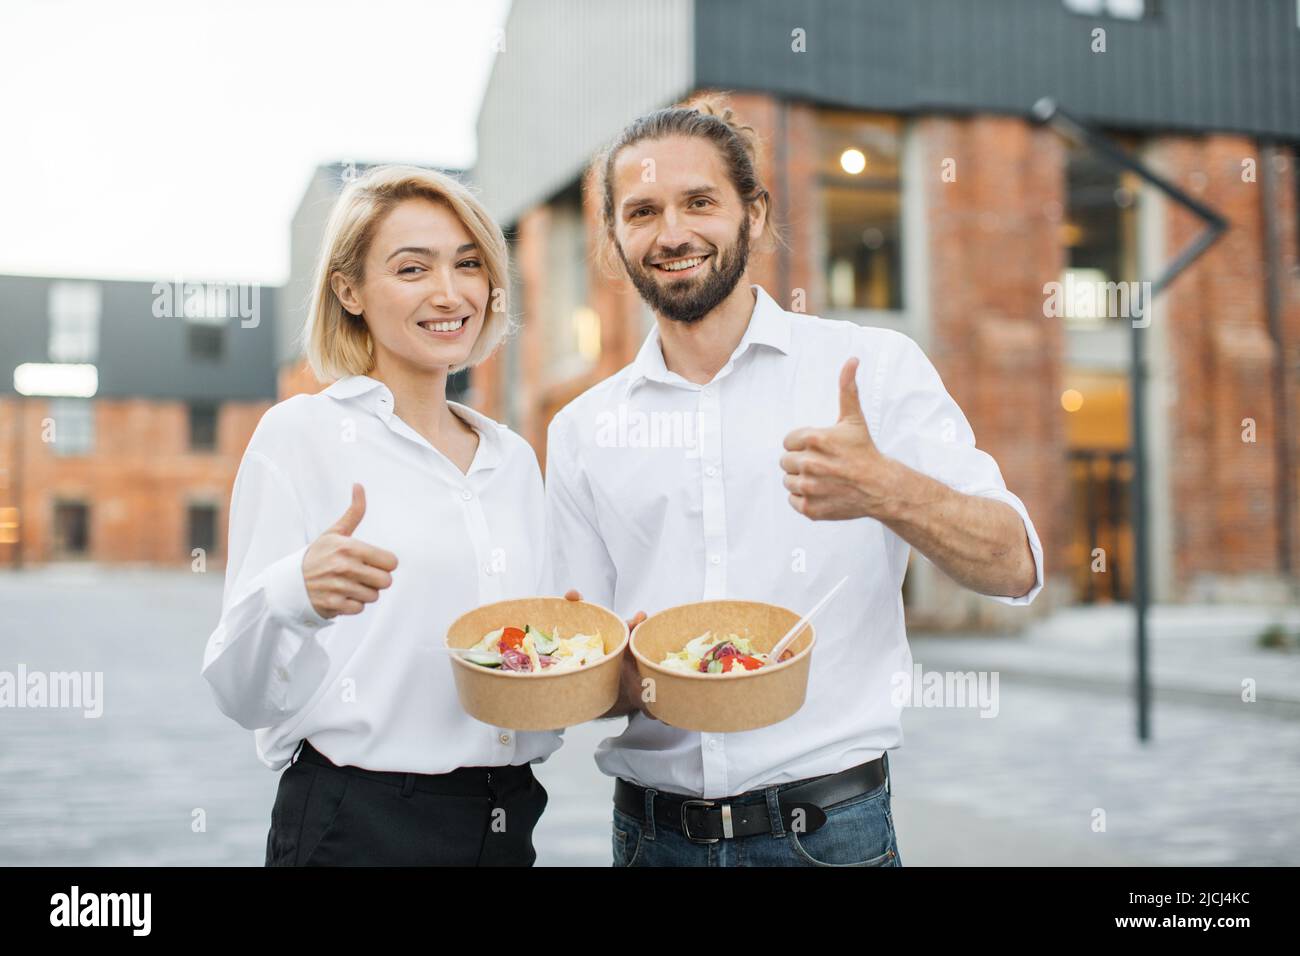 Young cheerful couple, colleague or business partners in white shirts having break and eating healthy meal walking at the city street showing thumb up. Organic healthy nutrition concept. Stock Photo